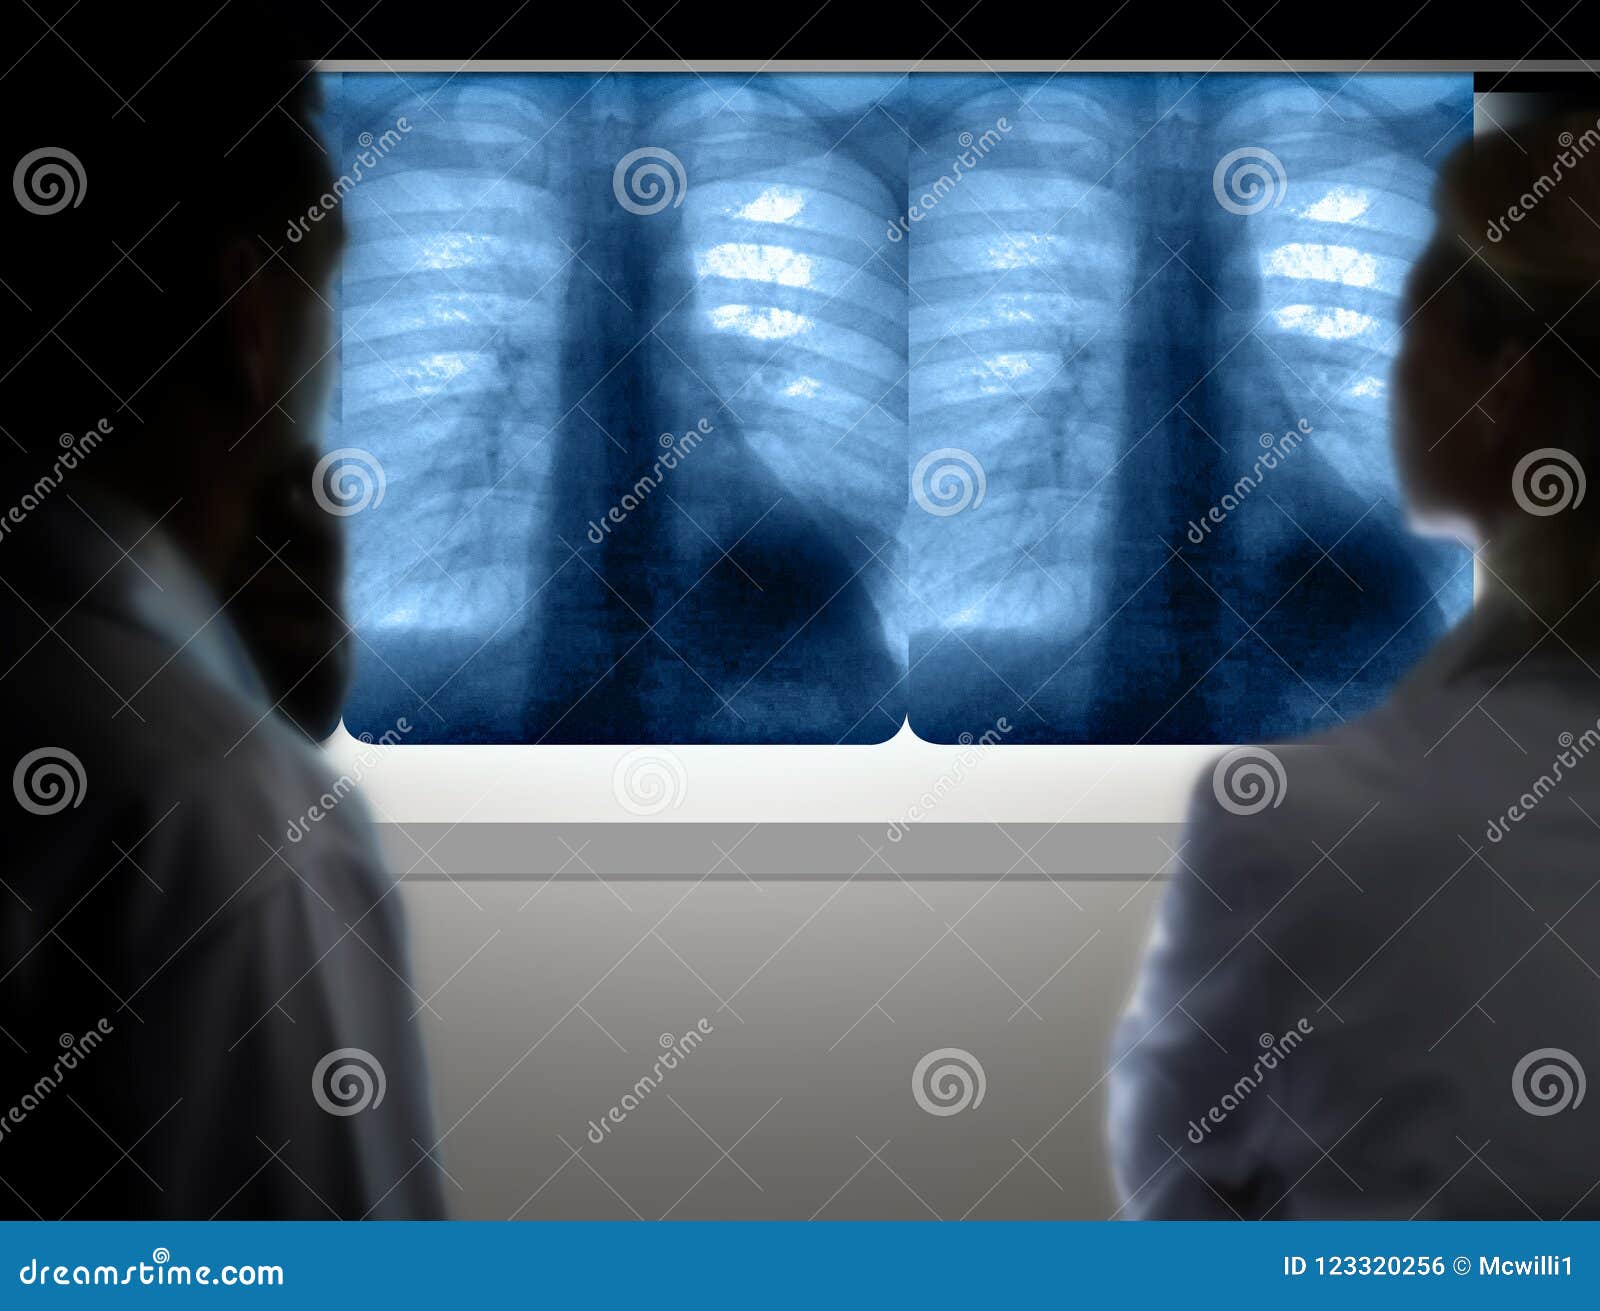 doctors diagnosing lung cancer from x-ray